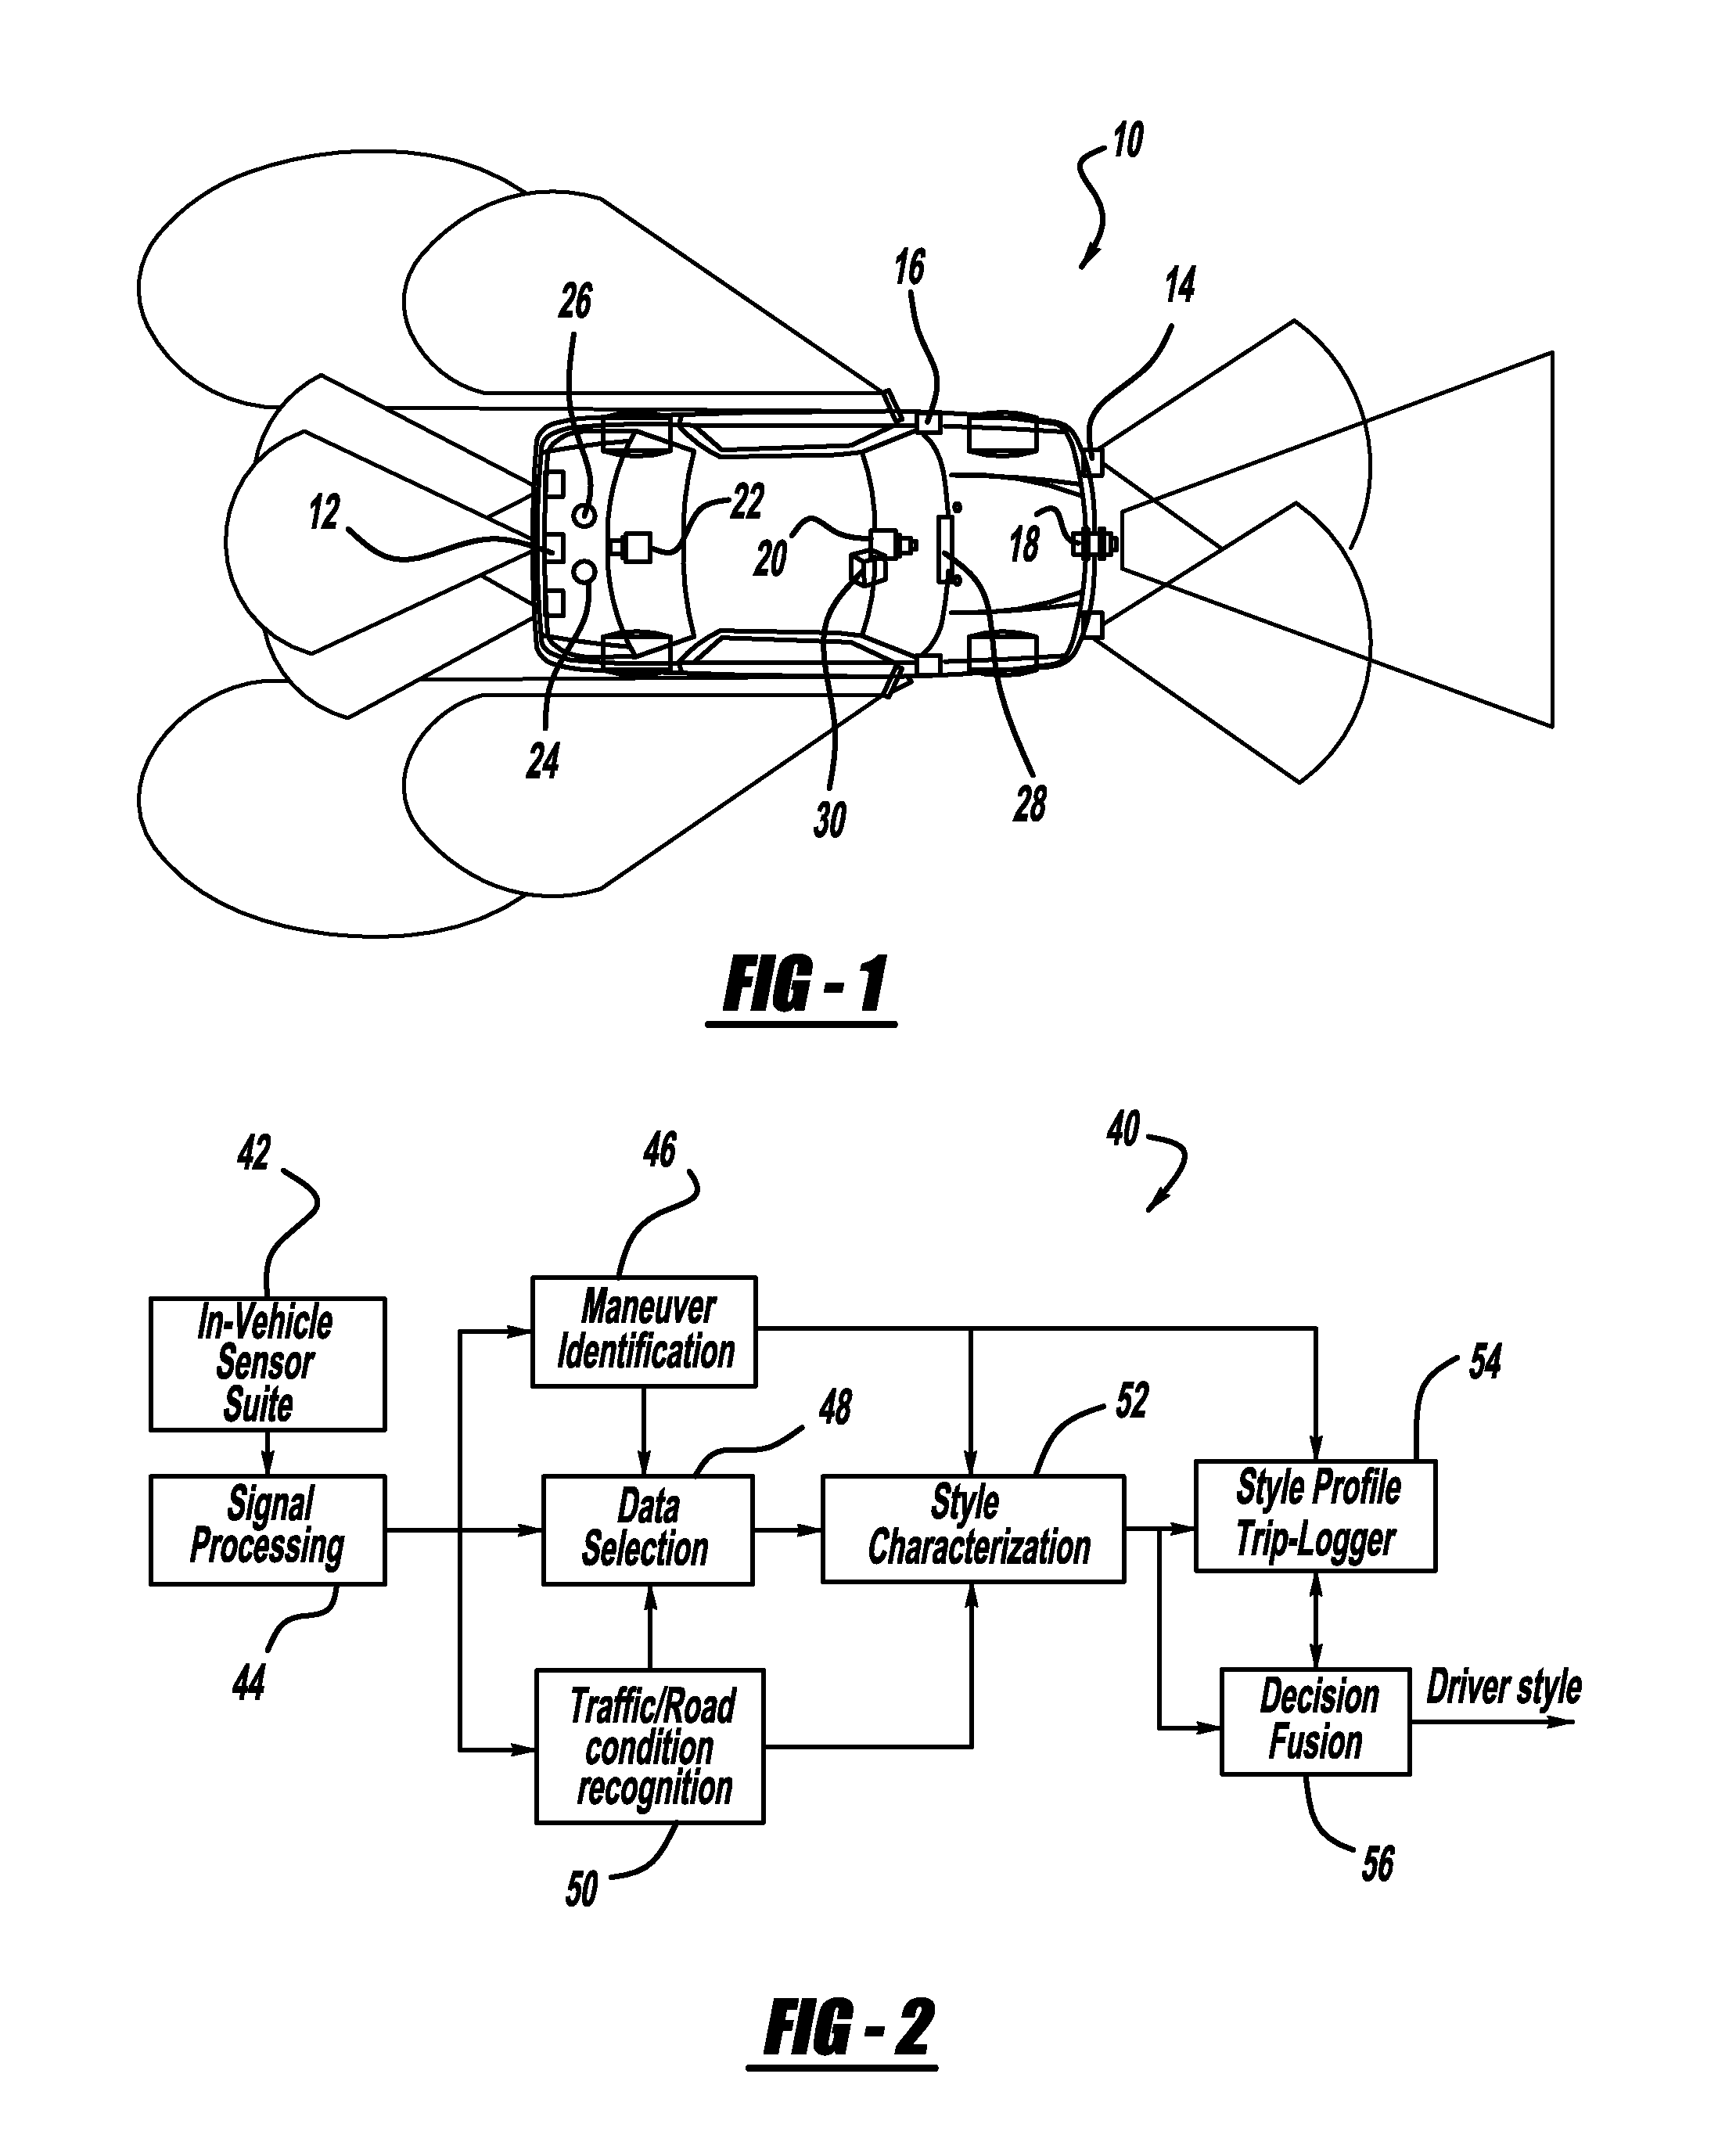 Adaptive vehicle control system with driving style recognition based on vehicle left/right turns